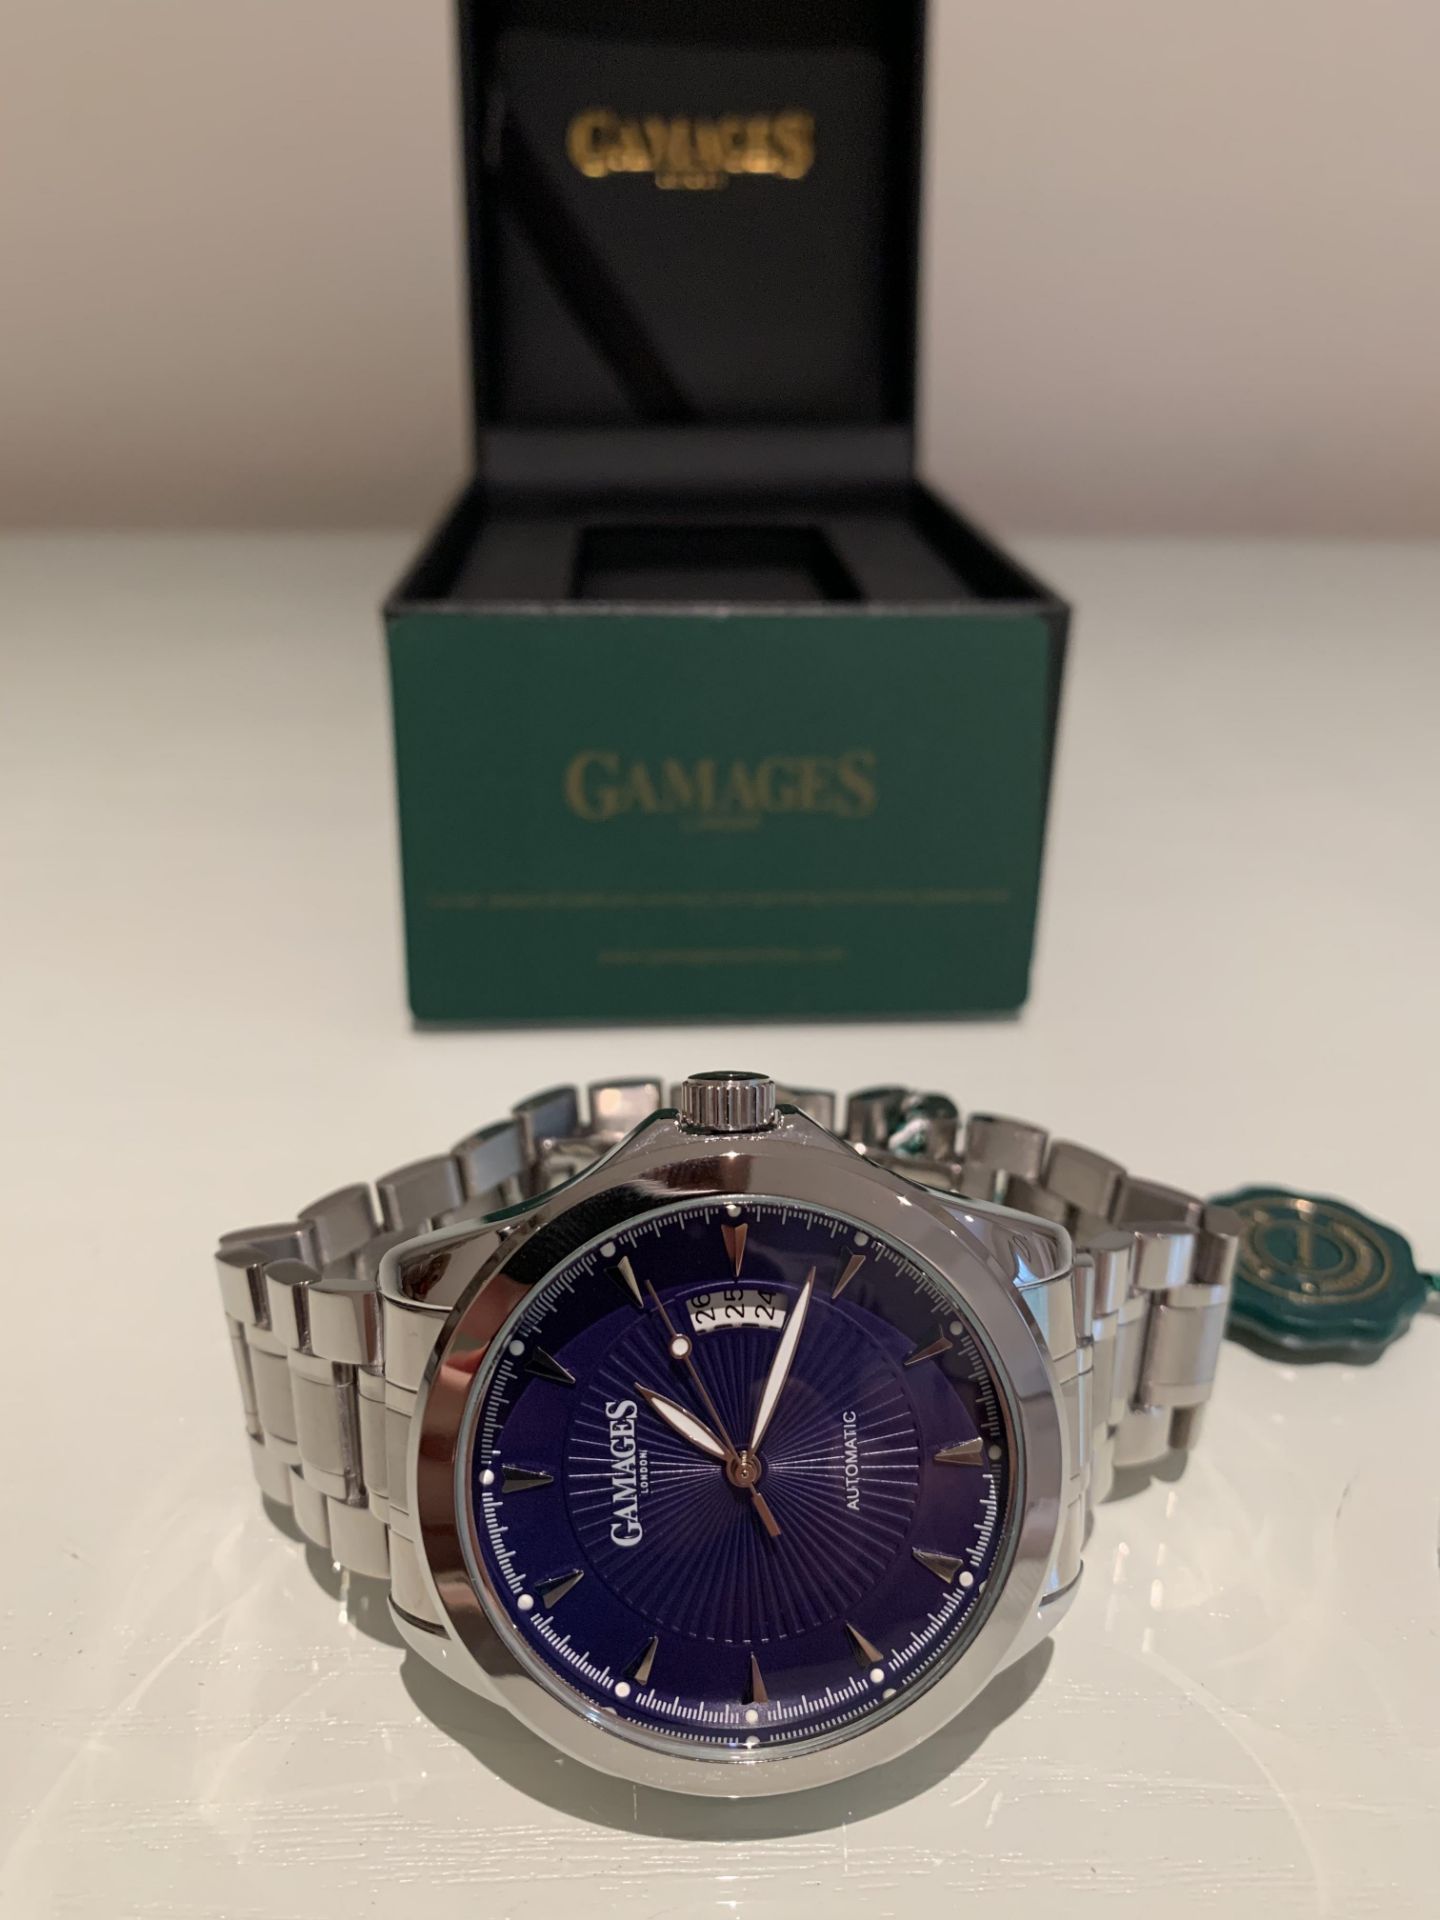 Limited Edition Hand Assembled GAMAGES Open Date Automatic Blue – 5 Year Warranty & Free Delivery - Image 4 of 10